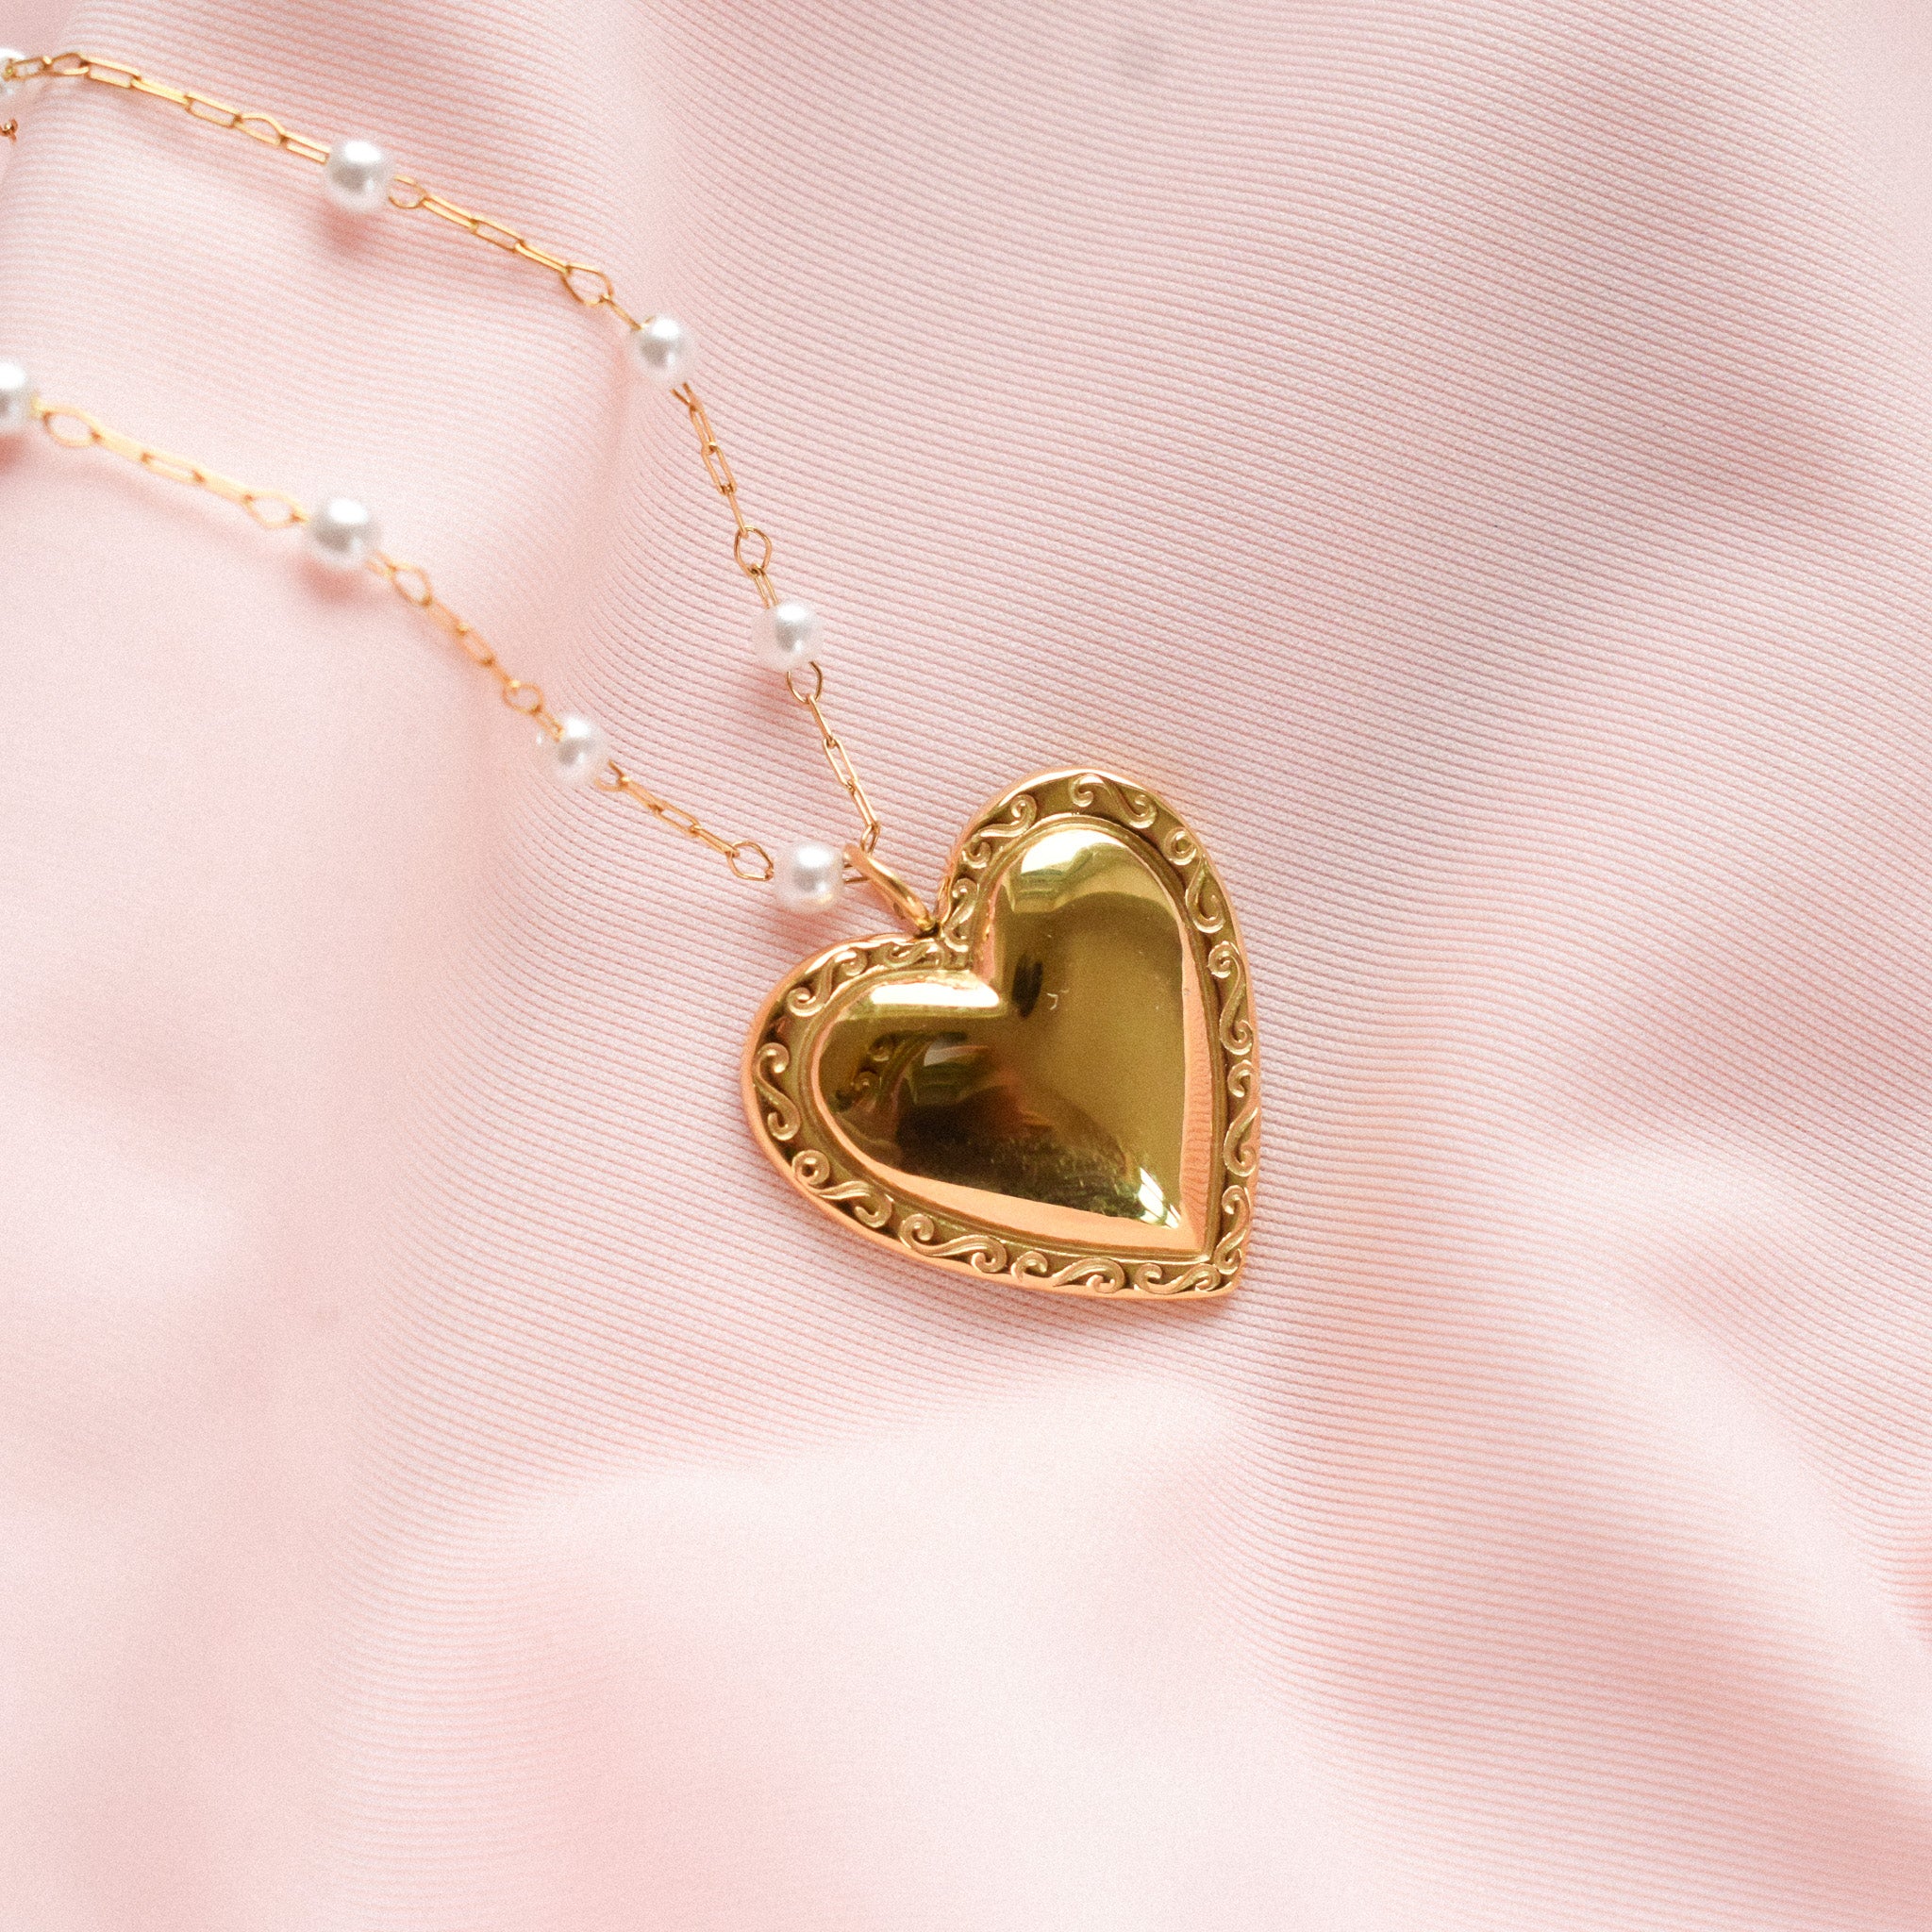 “Empathy” Heart Necklace